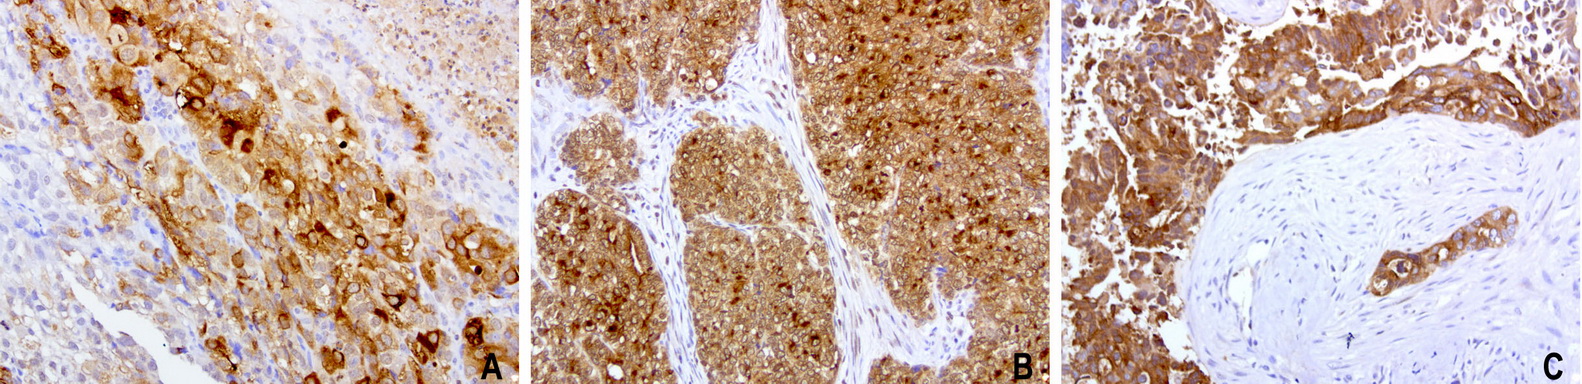 WFDC2 / HE4 Antibody - Immunohistochemical staining of paraffin-embedded 3 human endometrial cancer using anti-HE4 clone UMAB87 mouse monoclonal antibody at 1:200 dilution of 1.0 mg/mL using Polink2 Broad HRP DAB for detection.requires HIER with with citrate pH6.0 at 110C for 3 min using pressure chamber/cooker. The tumor cells show membrane and cytoplasmic staining.